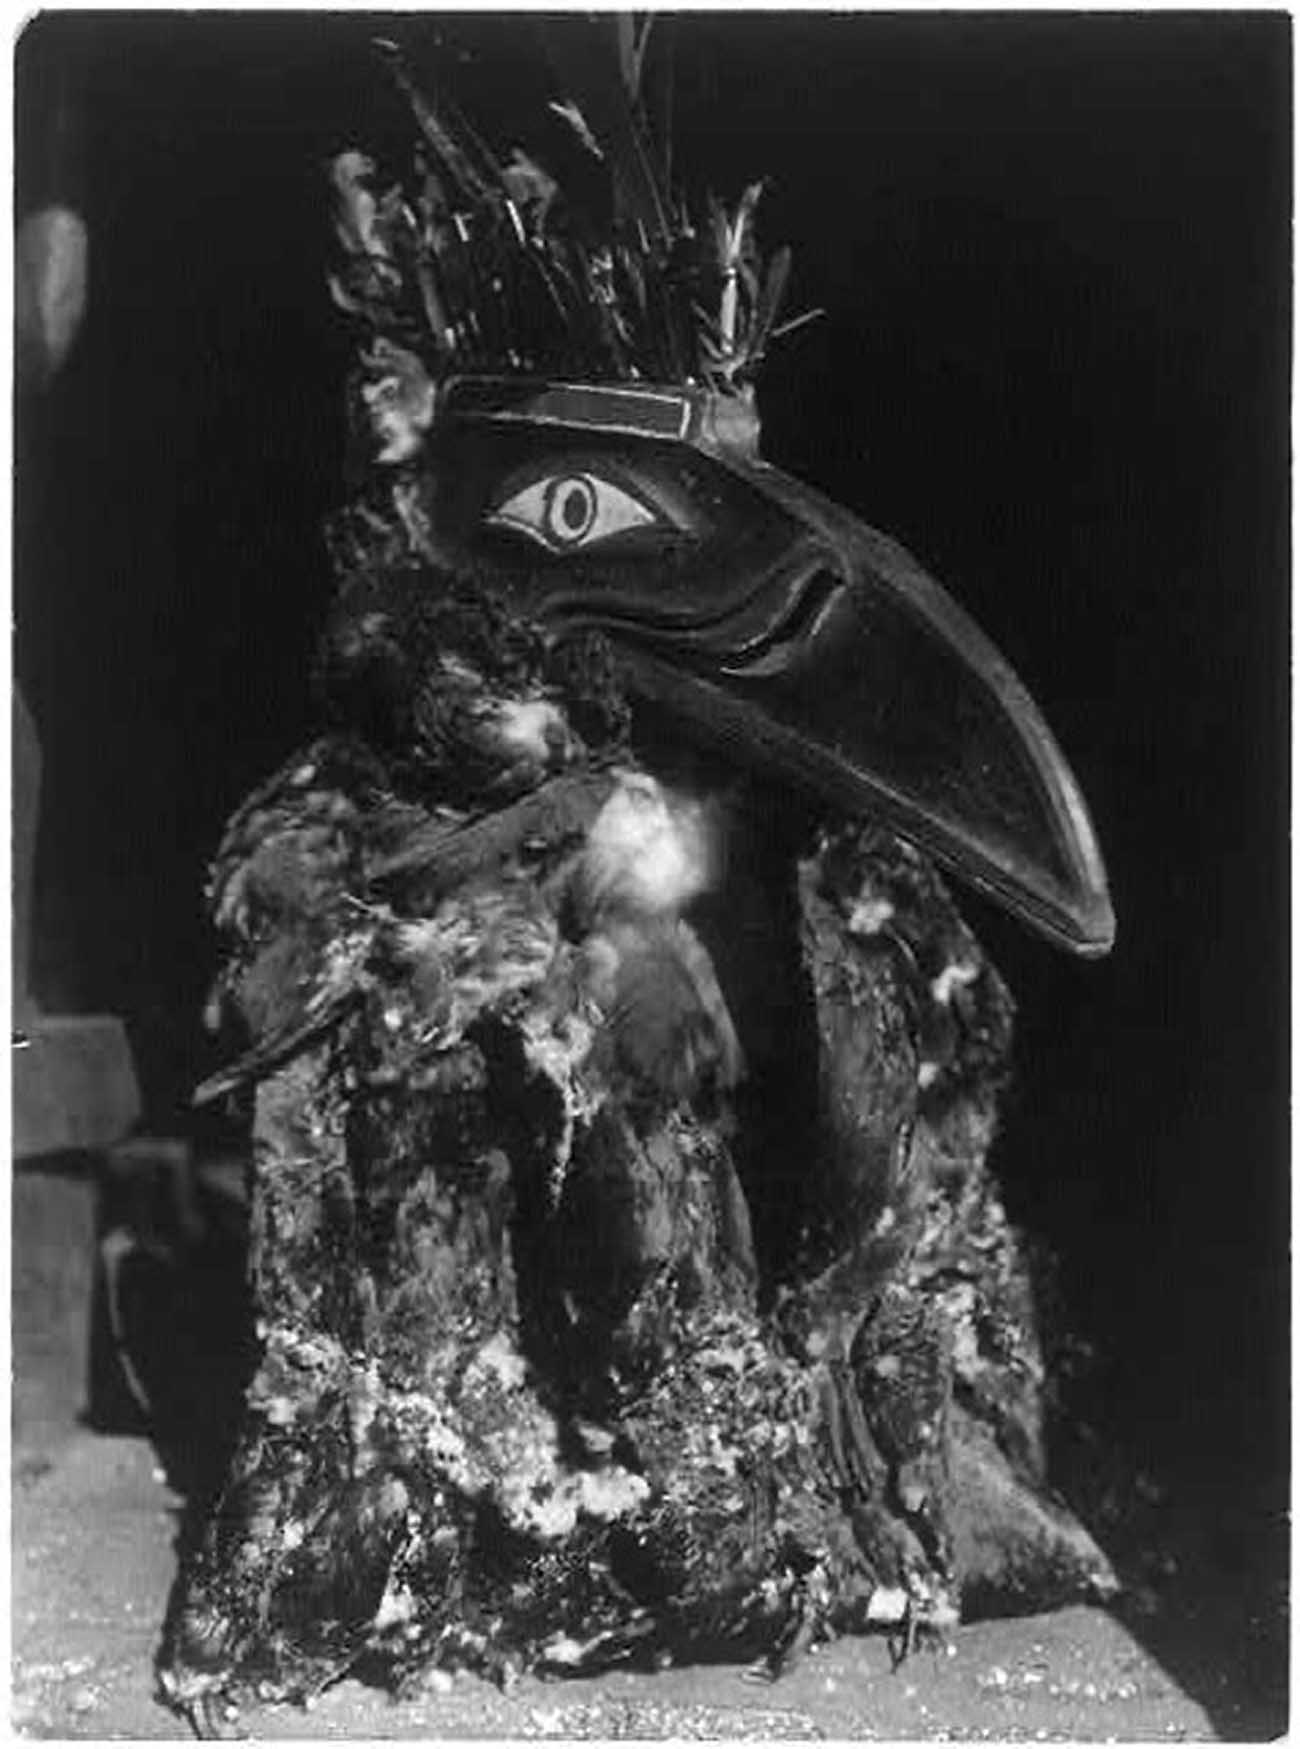 Dancer wearing raven mask with coat of cormorant skins during the numhlin ceremony.